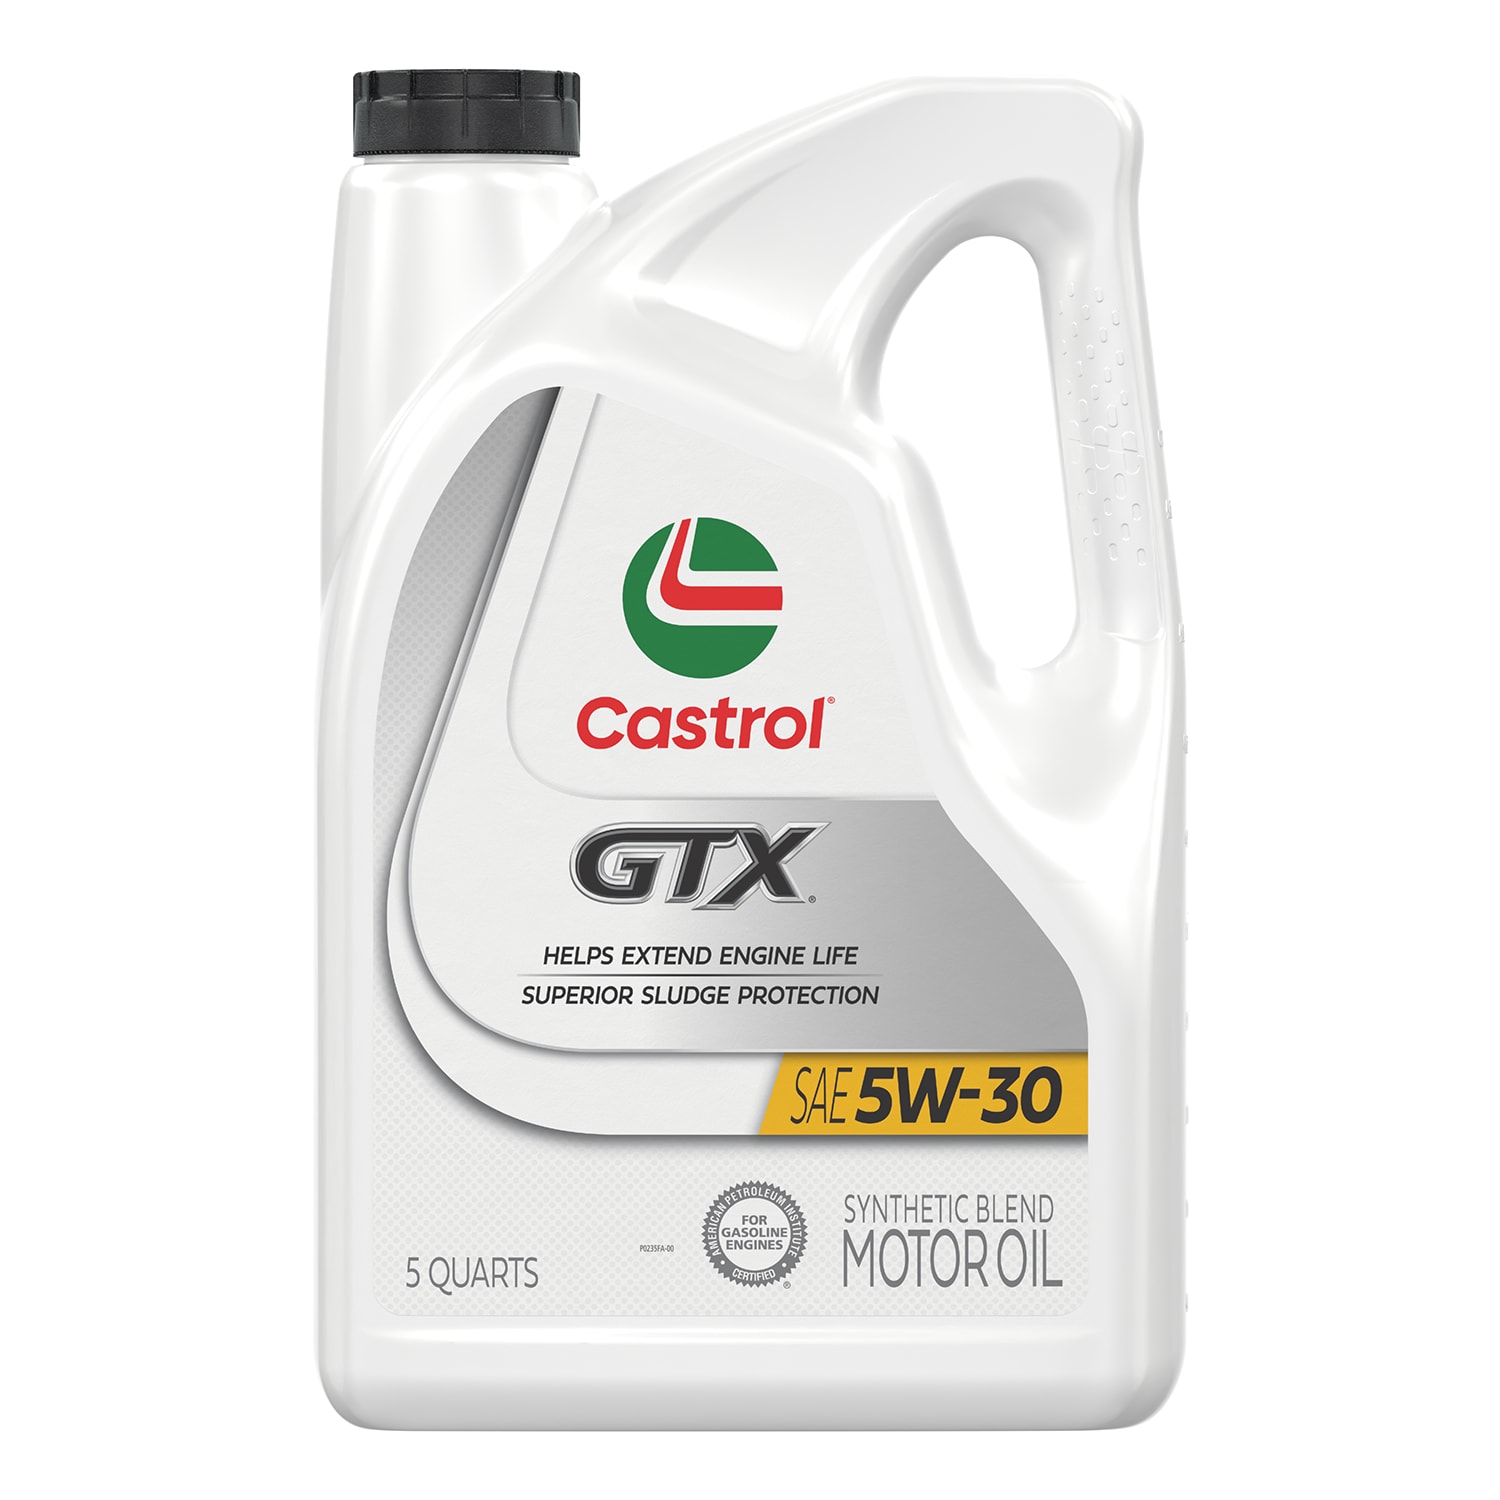 CASTROL Gtx Ultraclean 5w-30, 5 Qt in the Motor Oil & Additives 